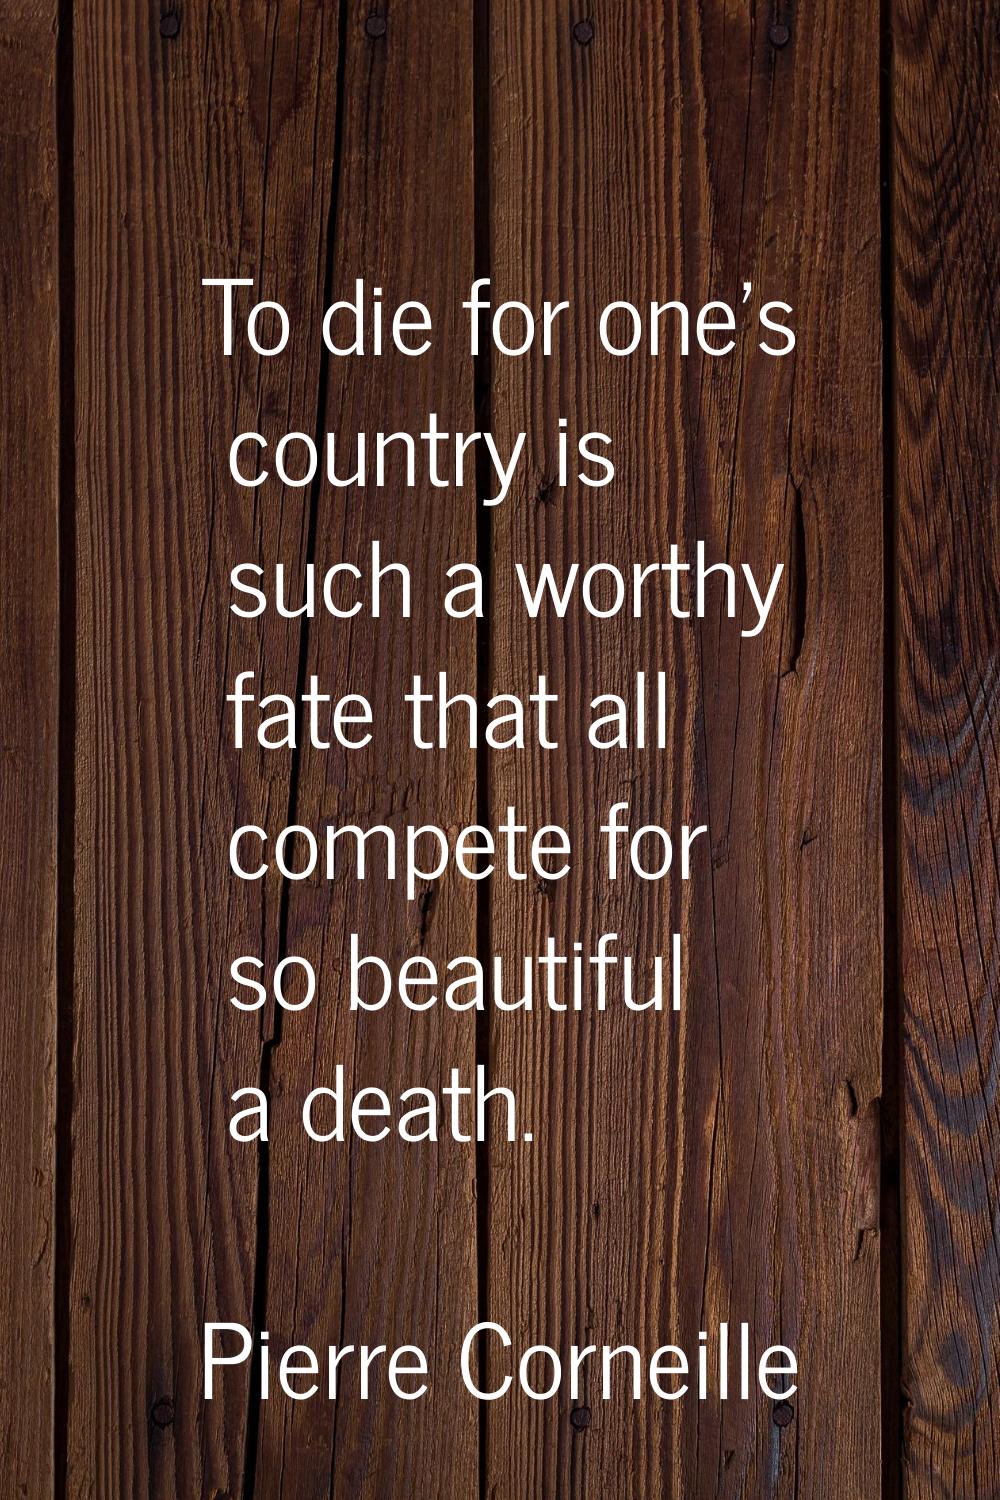 To die for one's country is such a worthy fate that all compete for so beautiful a death.